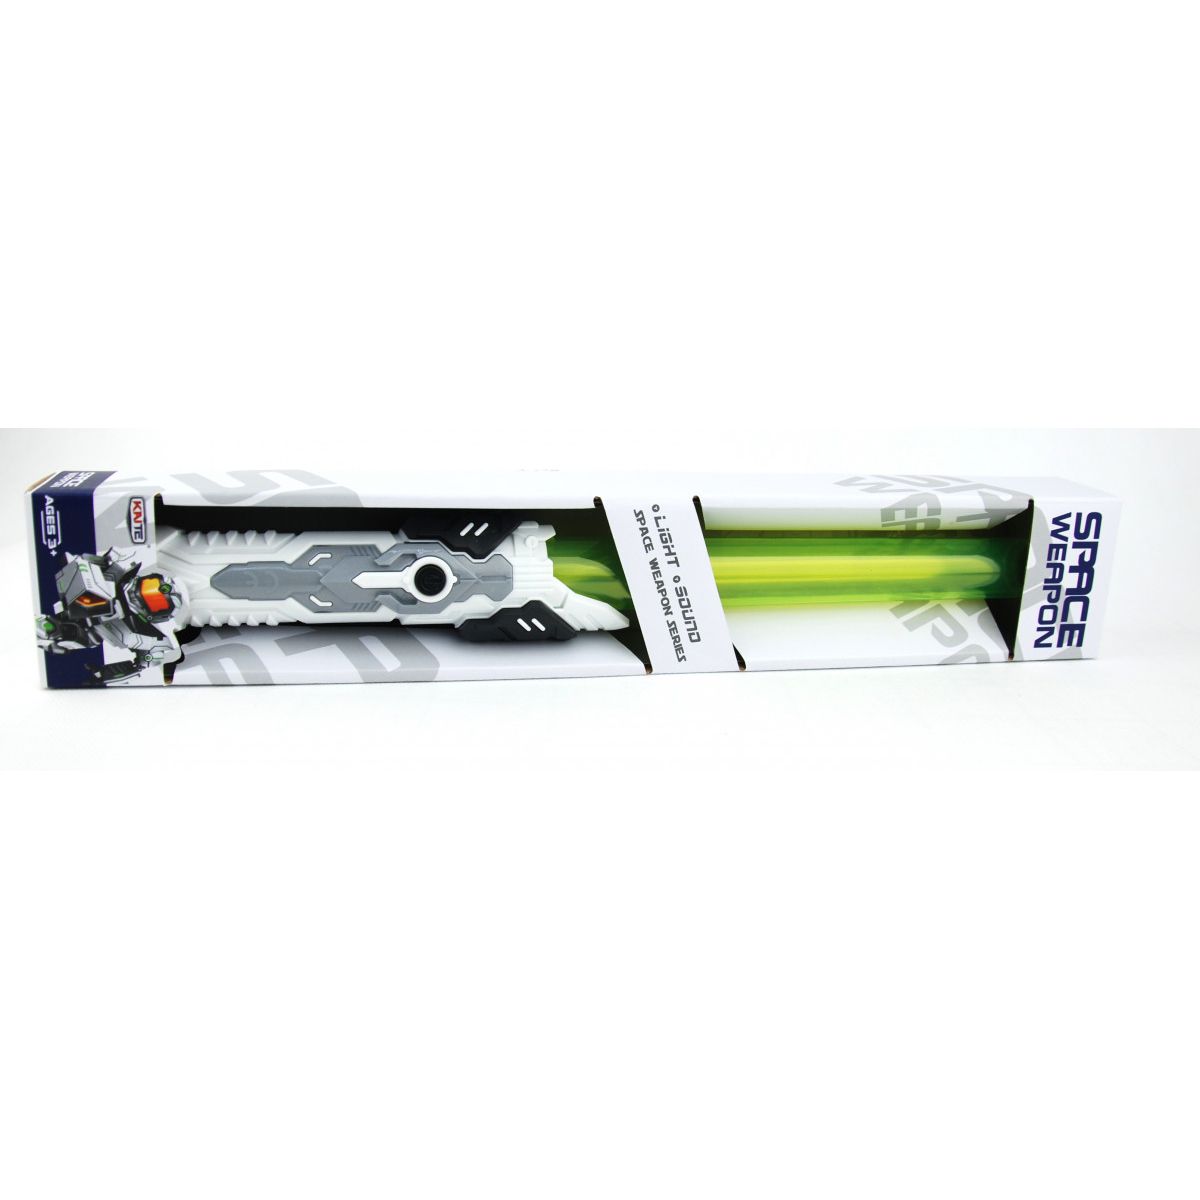 Miecz Dromader Laserowy na baterie (130-1340632)